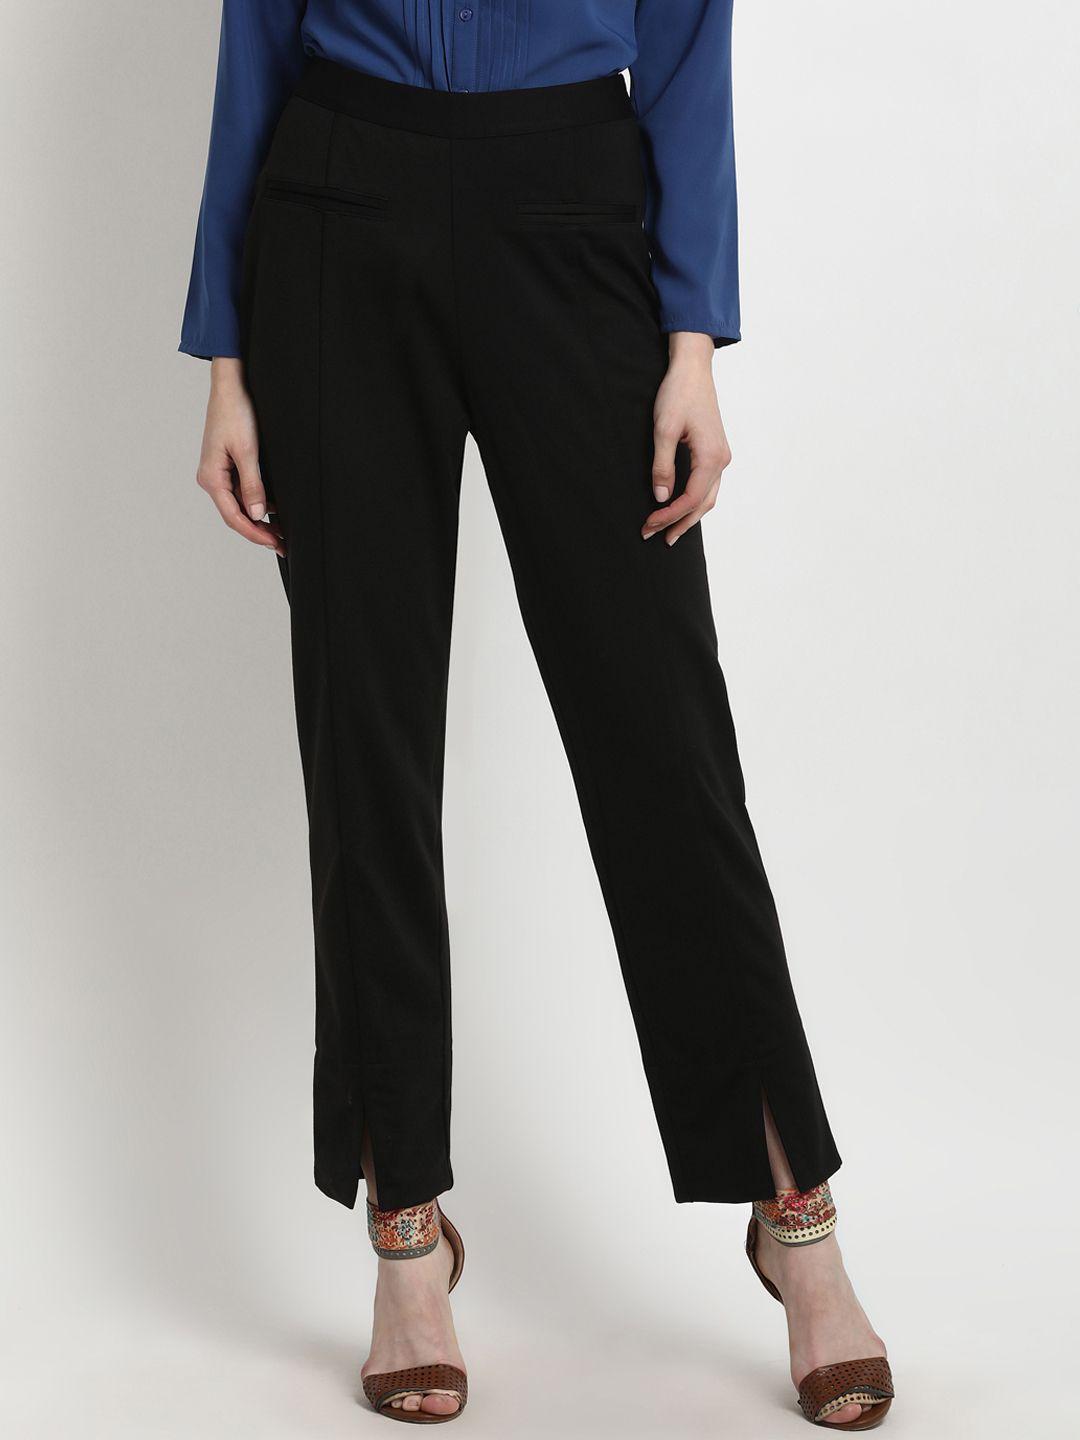 marie claire women black smart regular fit solid trousers